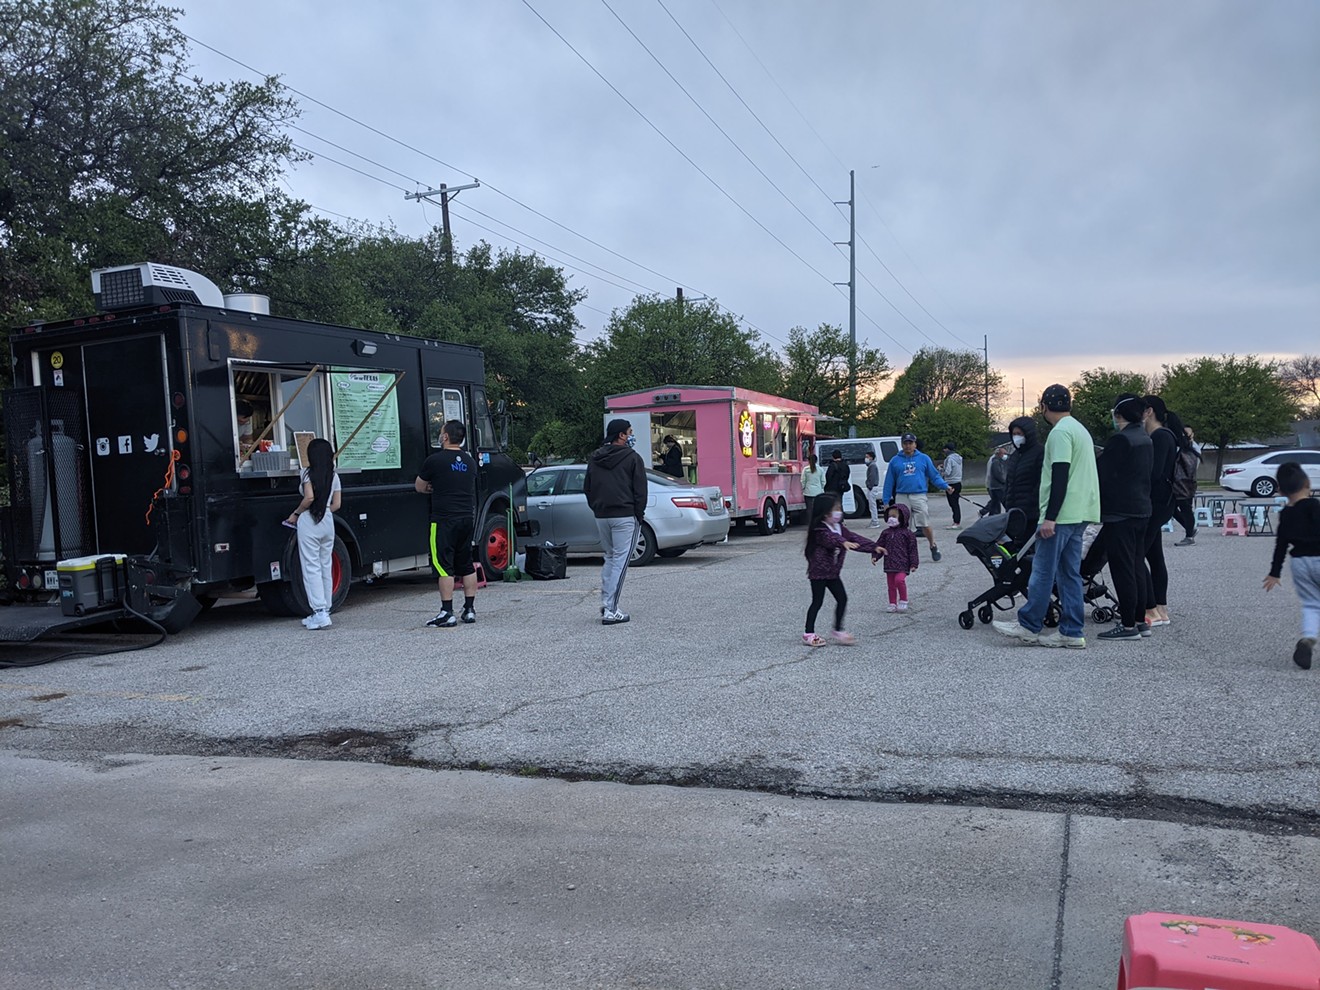 Outside Garland's Cali Saigon Mall, five food trucks and trailers serve snacks after 7 p.m. every Thursday through Sunday.